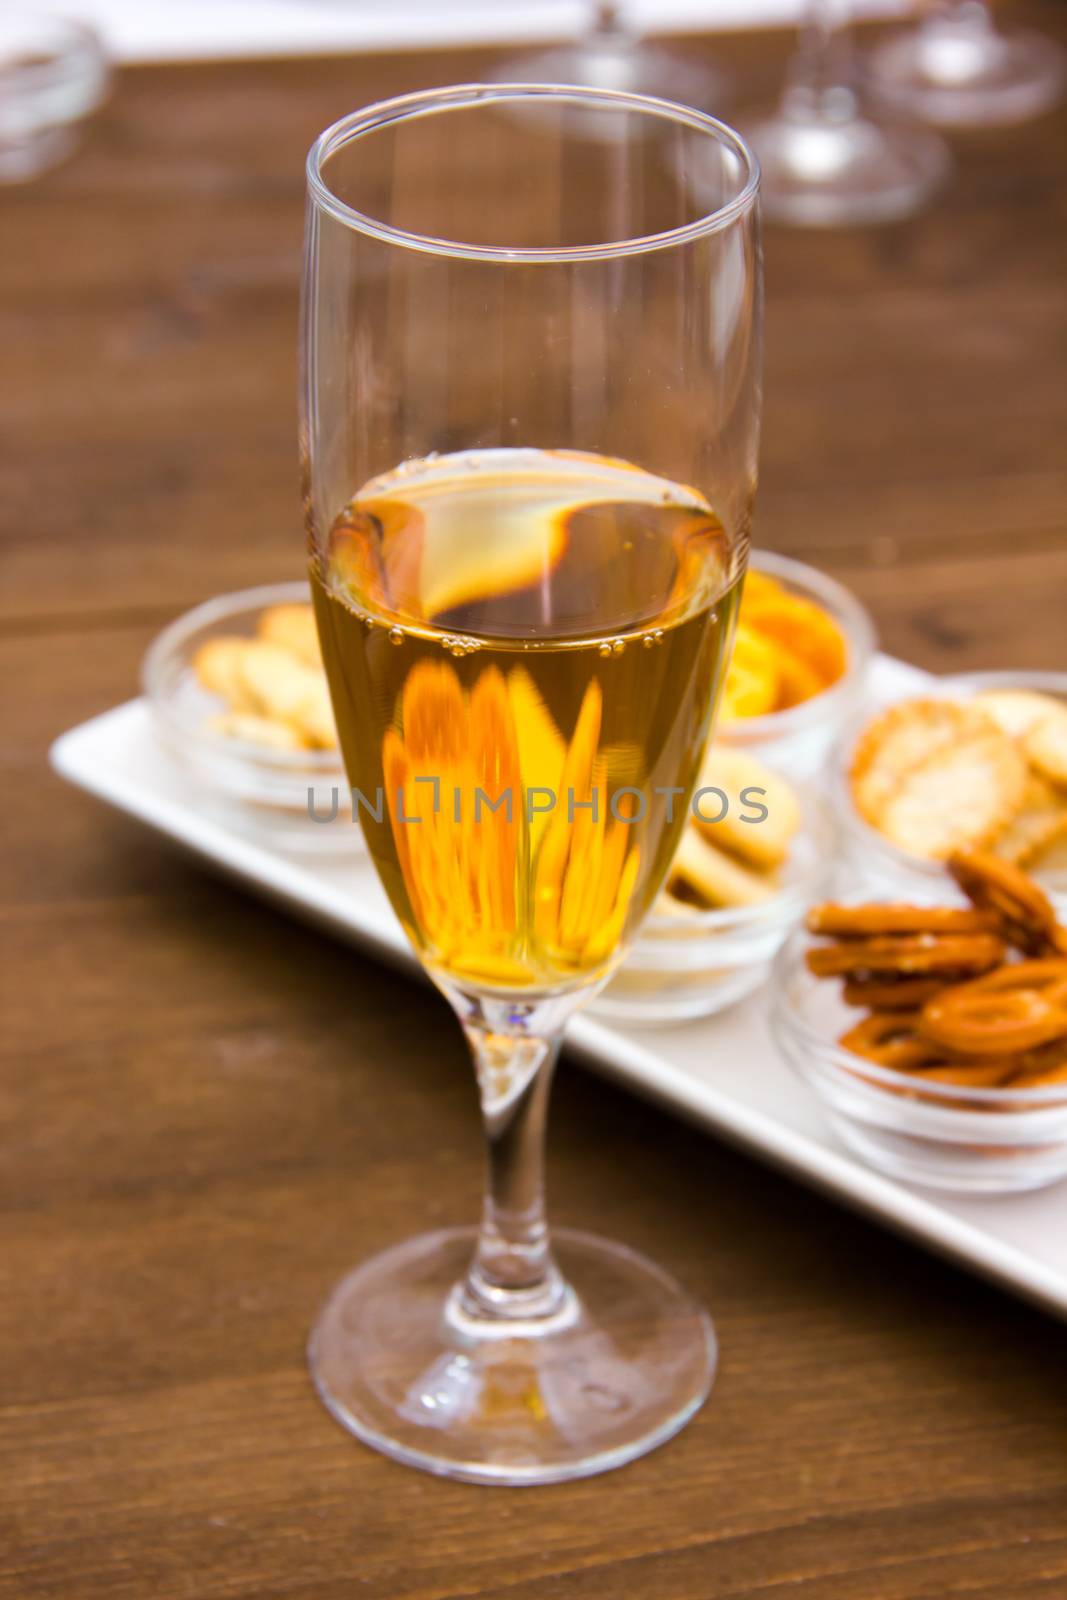 Flute with aperitif and pretzels on wooden table seen close